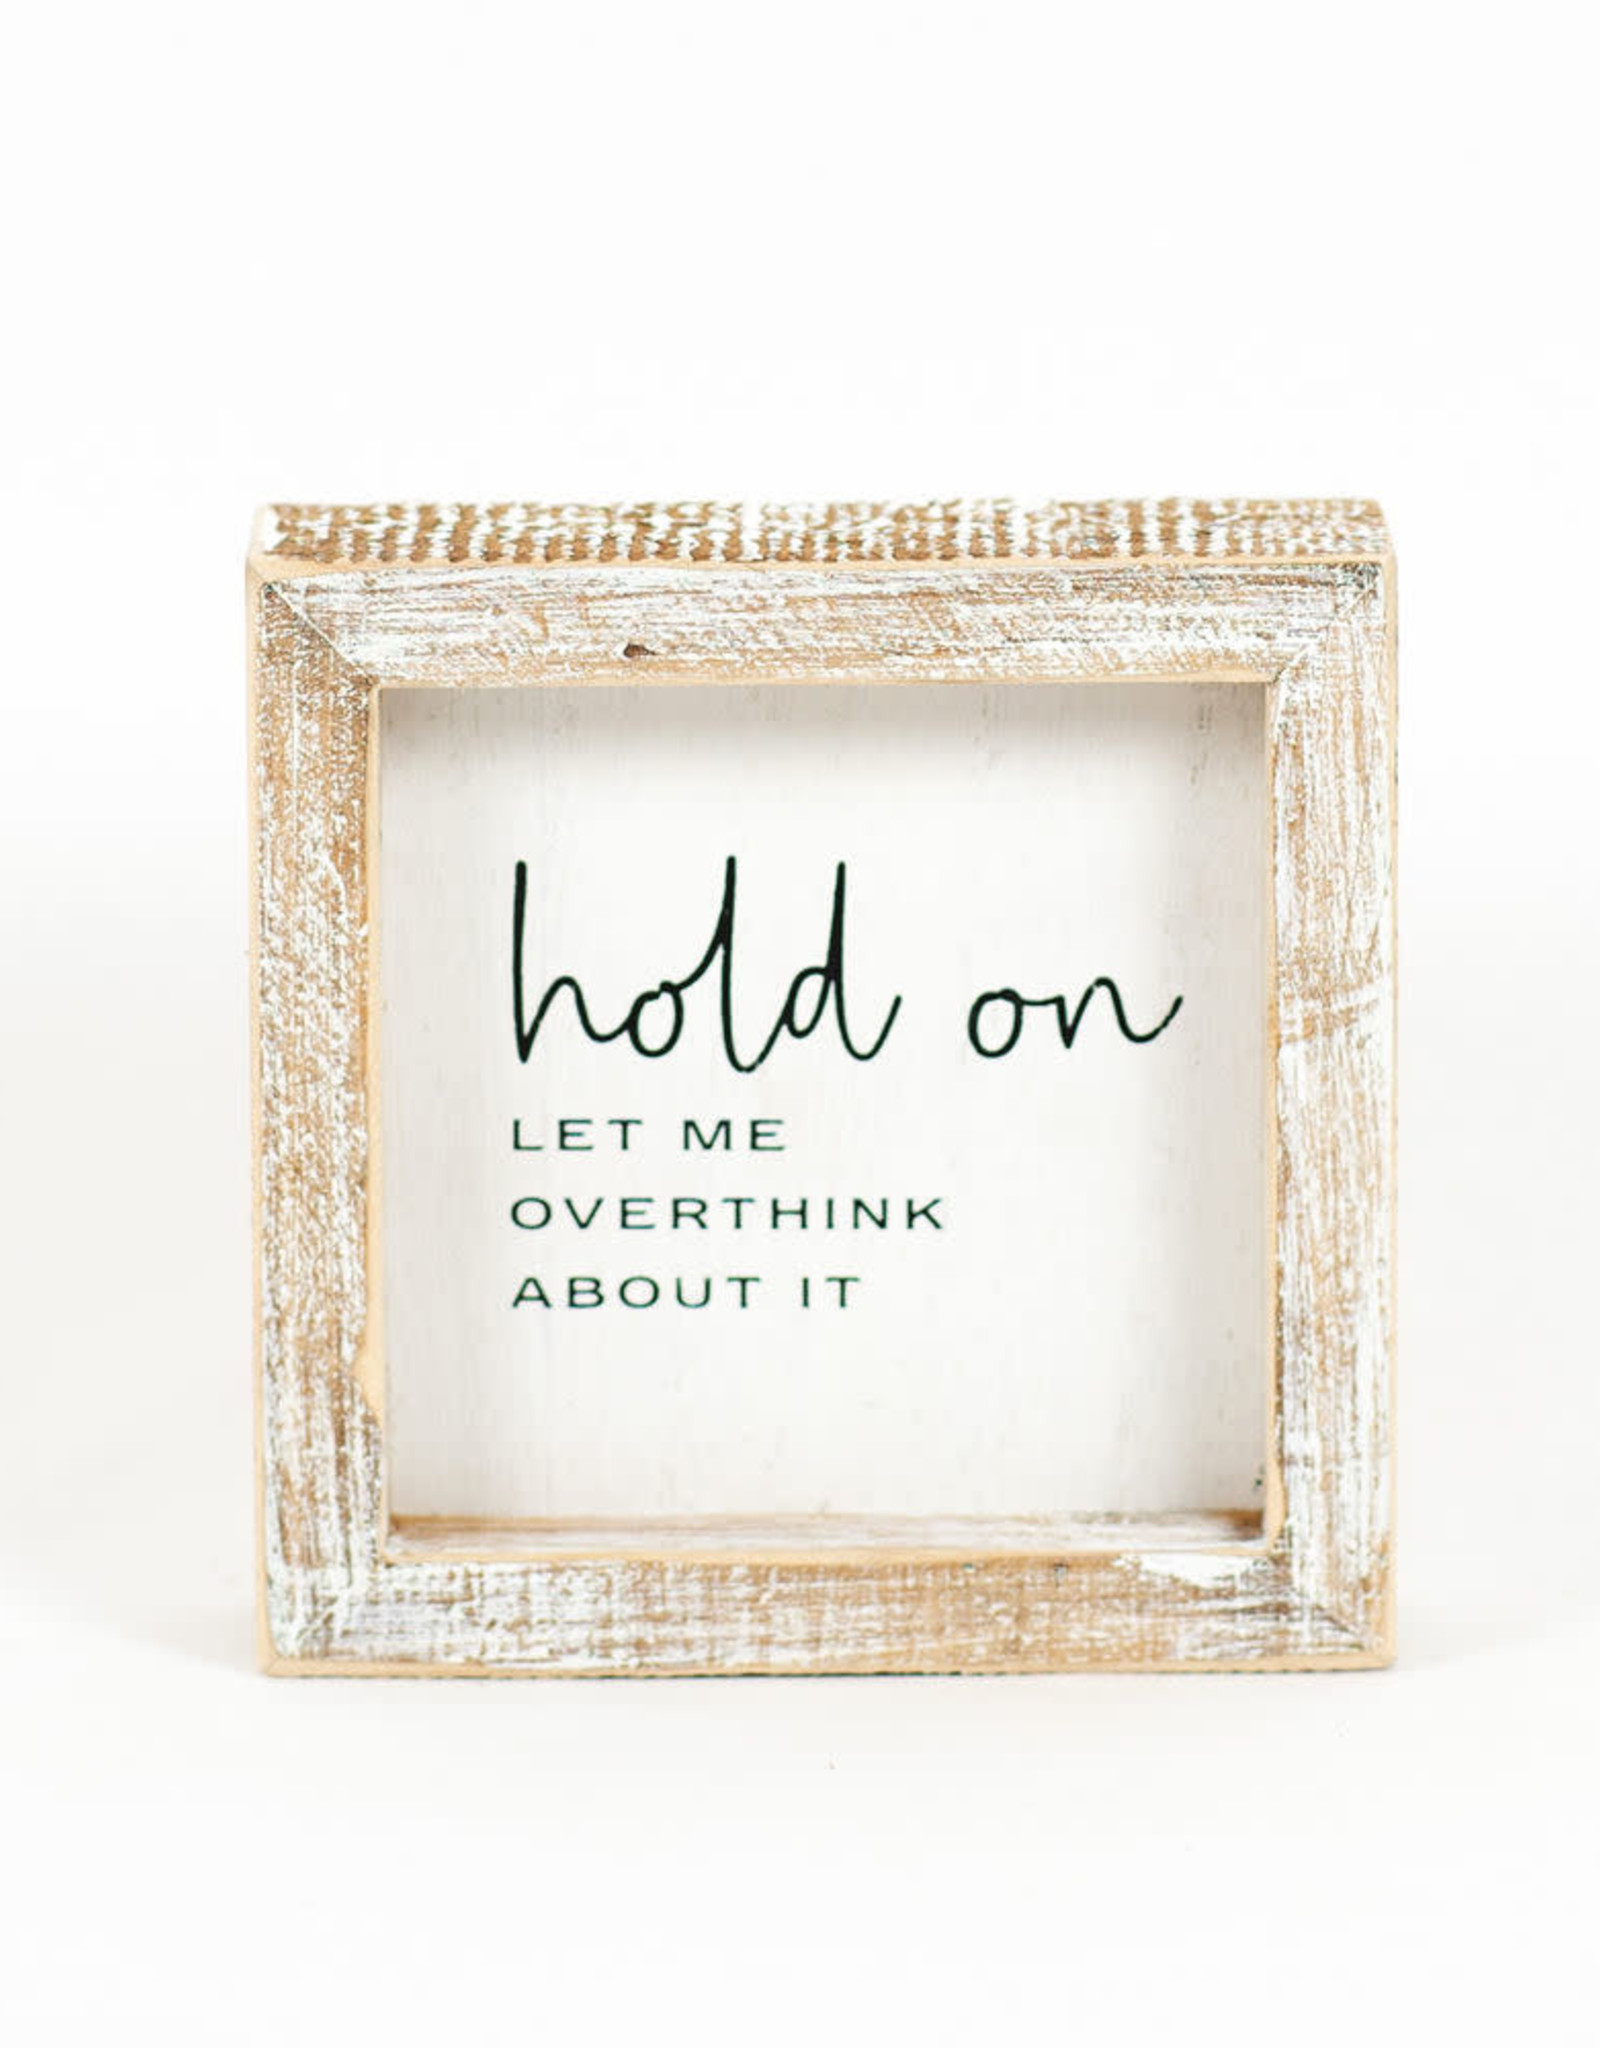 Home 11445 5X5X1.5 WOOD FRAMED SIGN (HOLD ON)